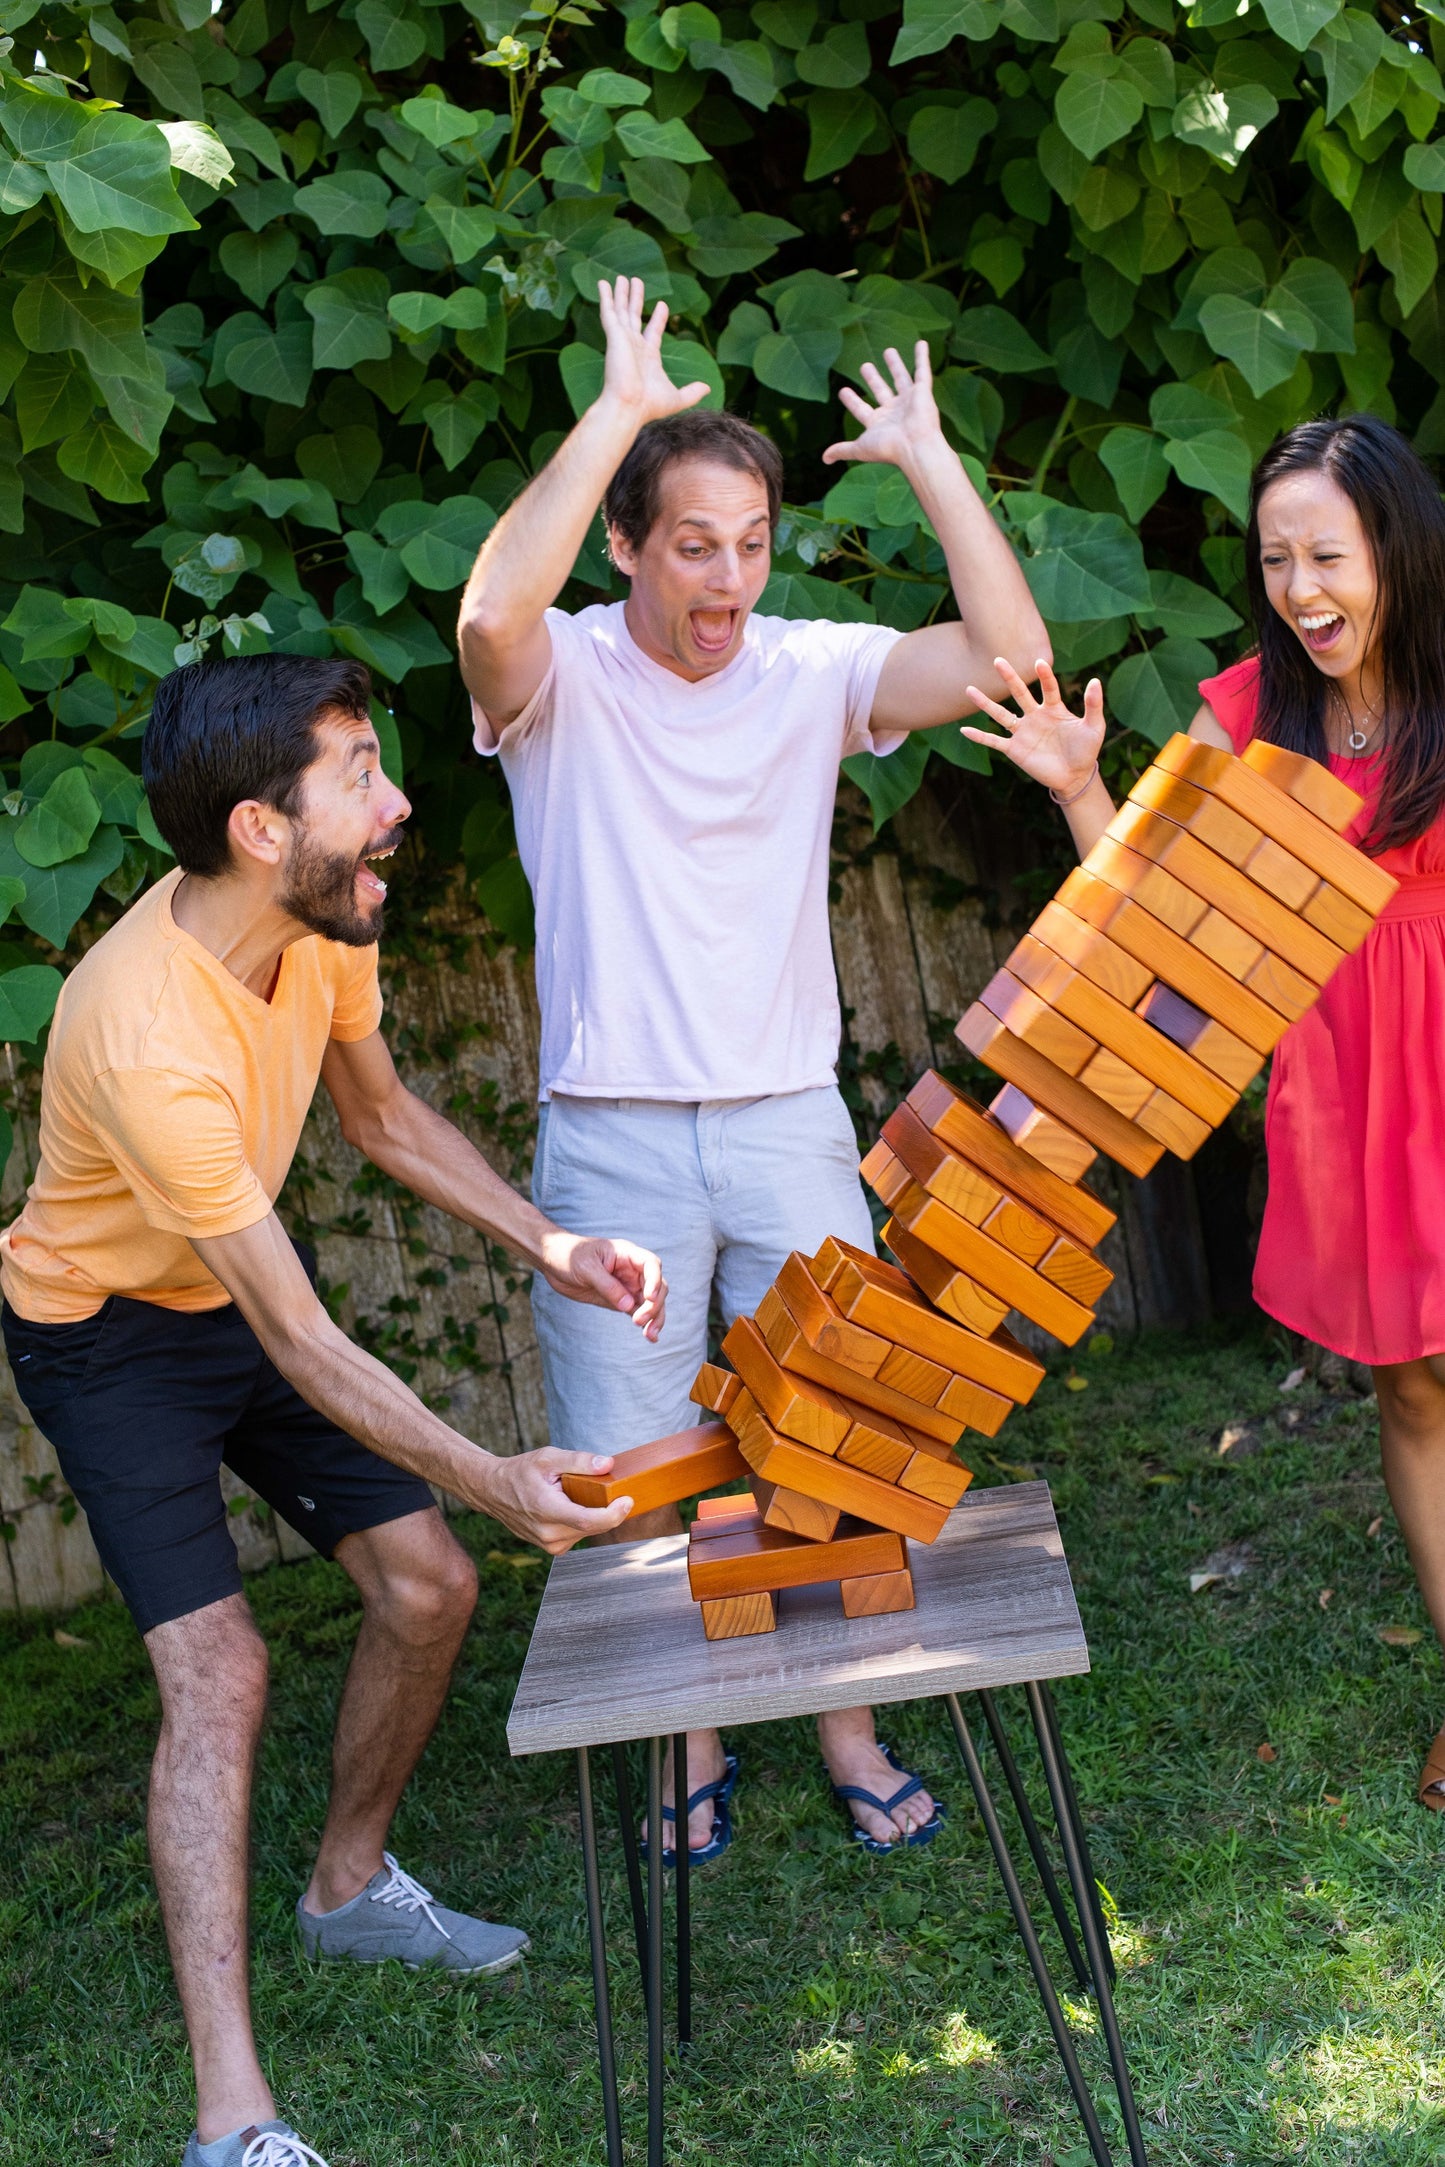 Giant Tumbling Timbers Yard Game Set with Carrying Case